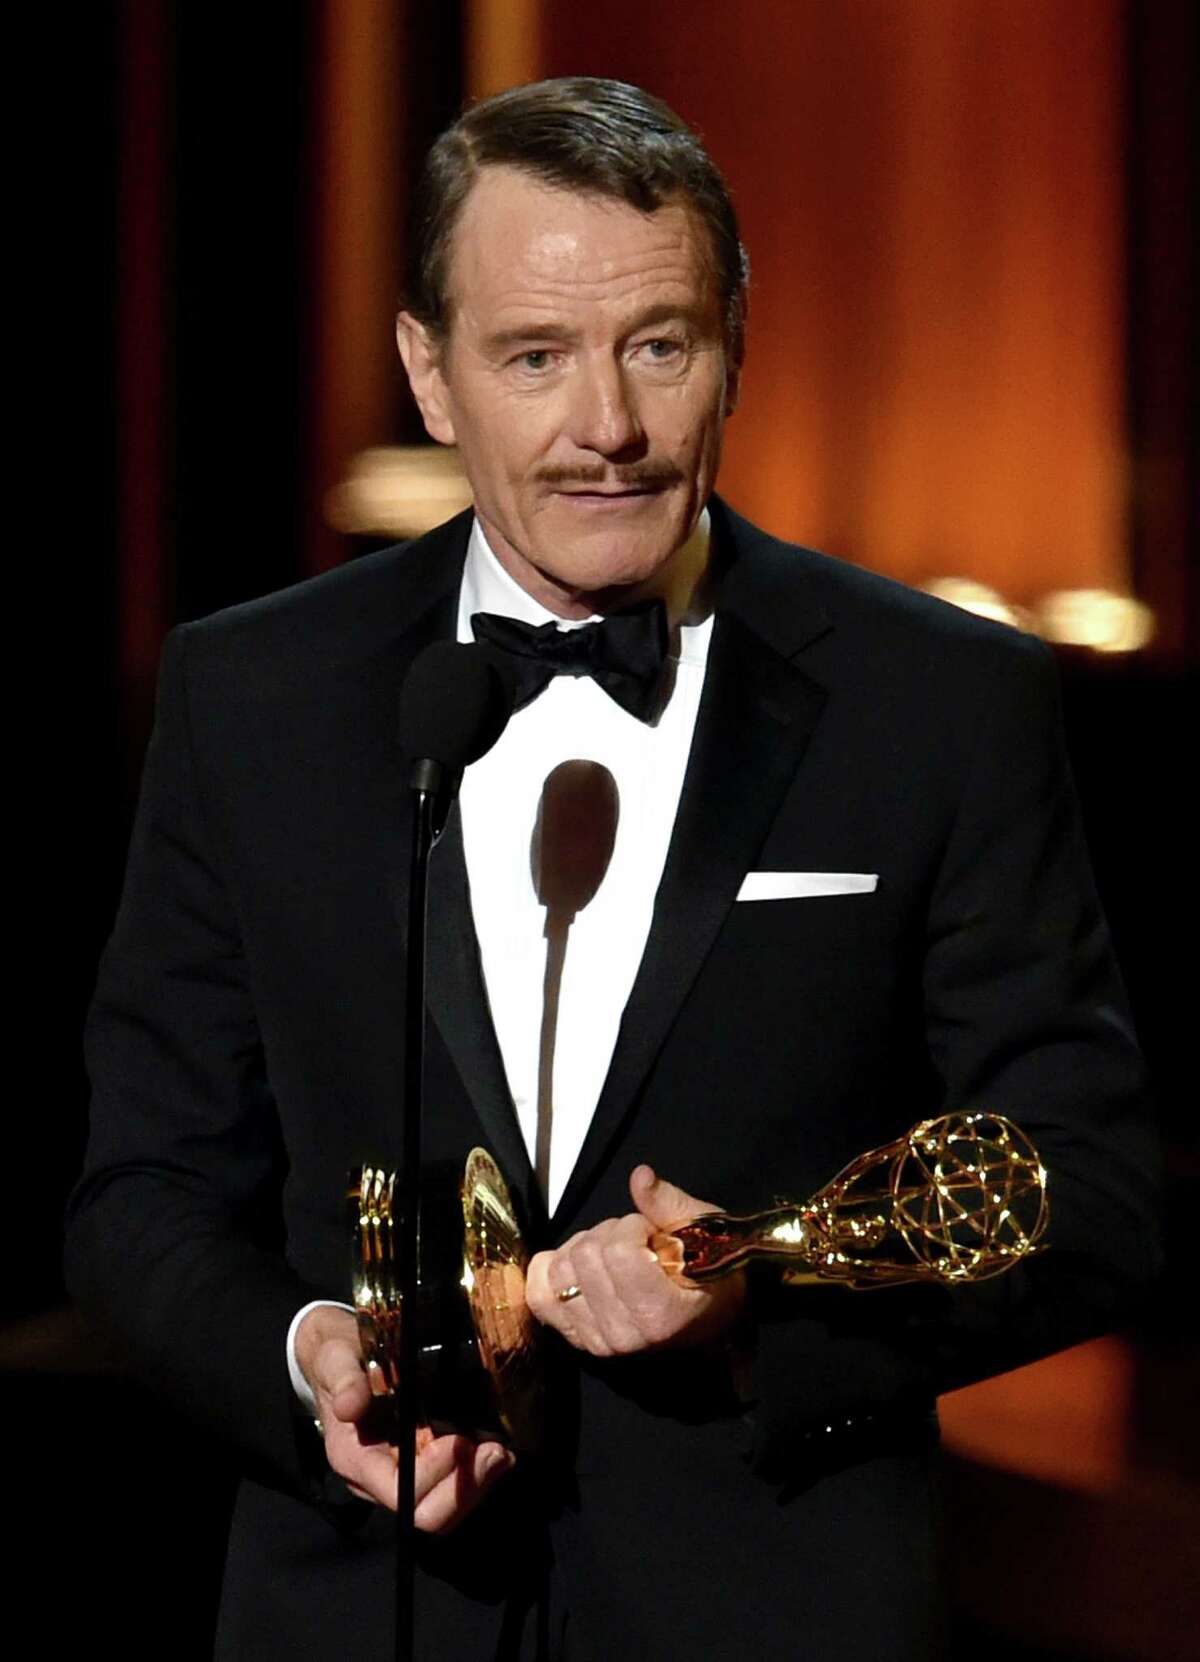 LOS ANGELES, CA - AUGUST 25: Actor Bryan Cranston accepts Outstanding Lead Actor in a Drama Series for 'Breaking Bad' onstage at the 66th Annual Primetime Emmy Awards held at Nokia Theatre L.A. Live on August 25, 2014 in Los Angeles, California. (Photo by Kevin Winter/Getty Images)